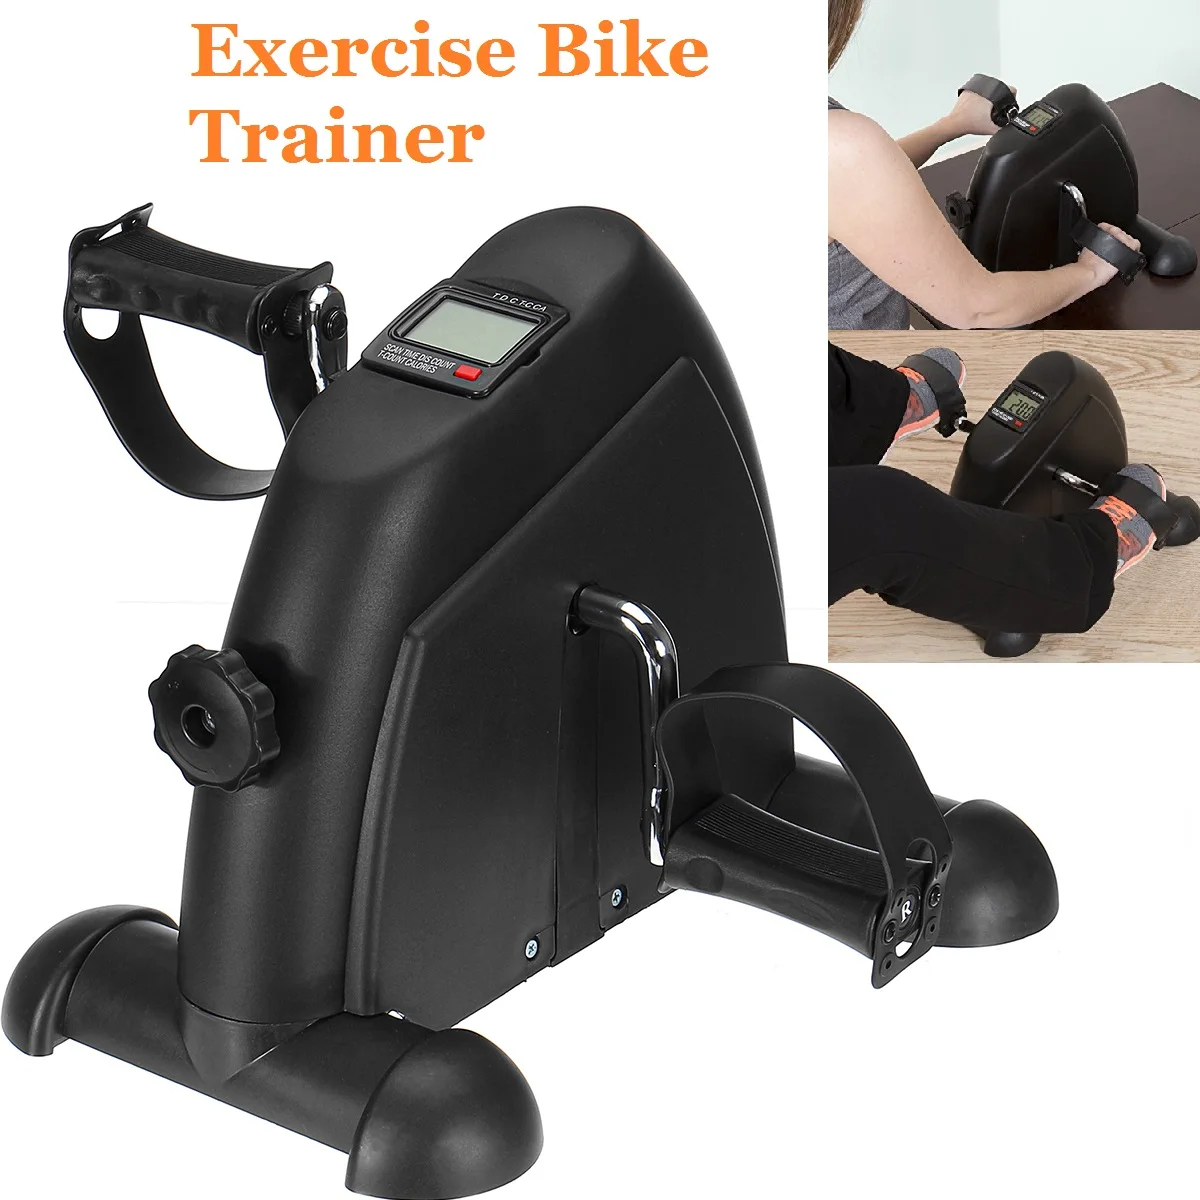 Mini Pedal Exercise Bike Trainer LCD Display Indoor Cycling Bikes Stepper Arm/Leg Physical Therapy Home Gym Fitness Equipment